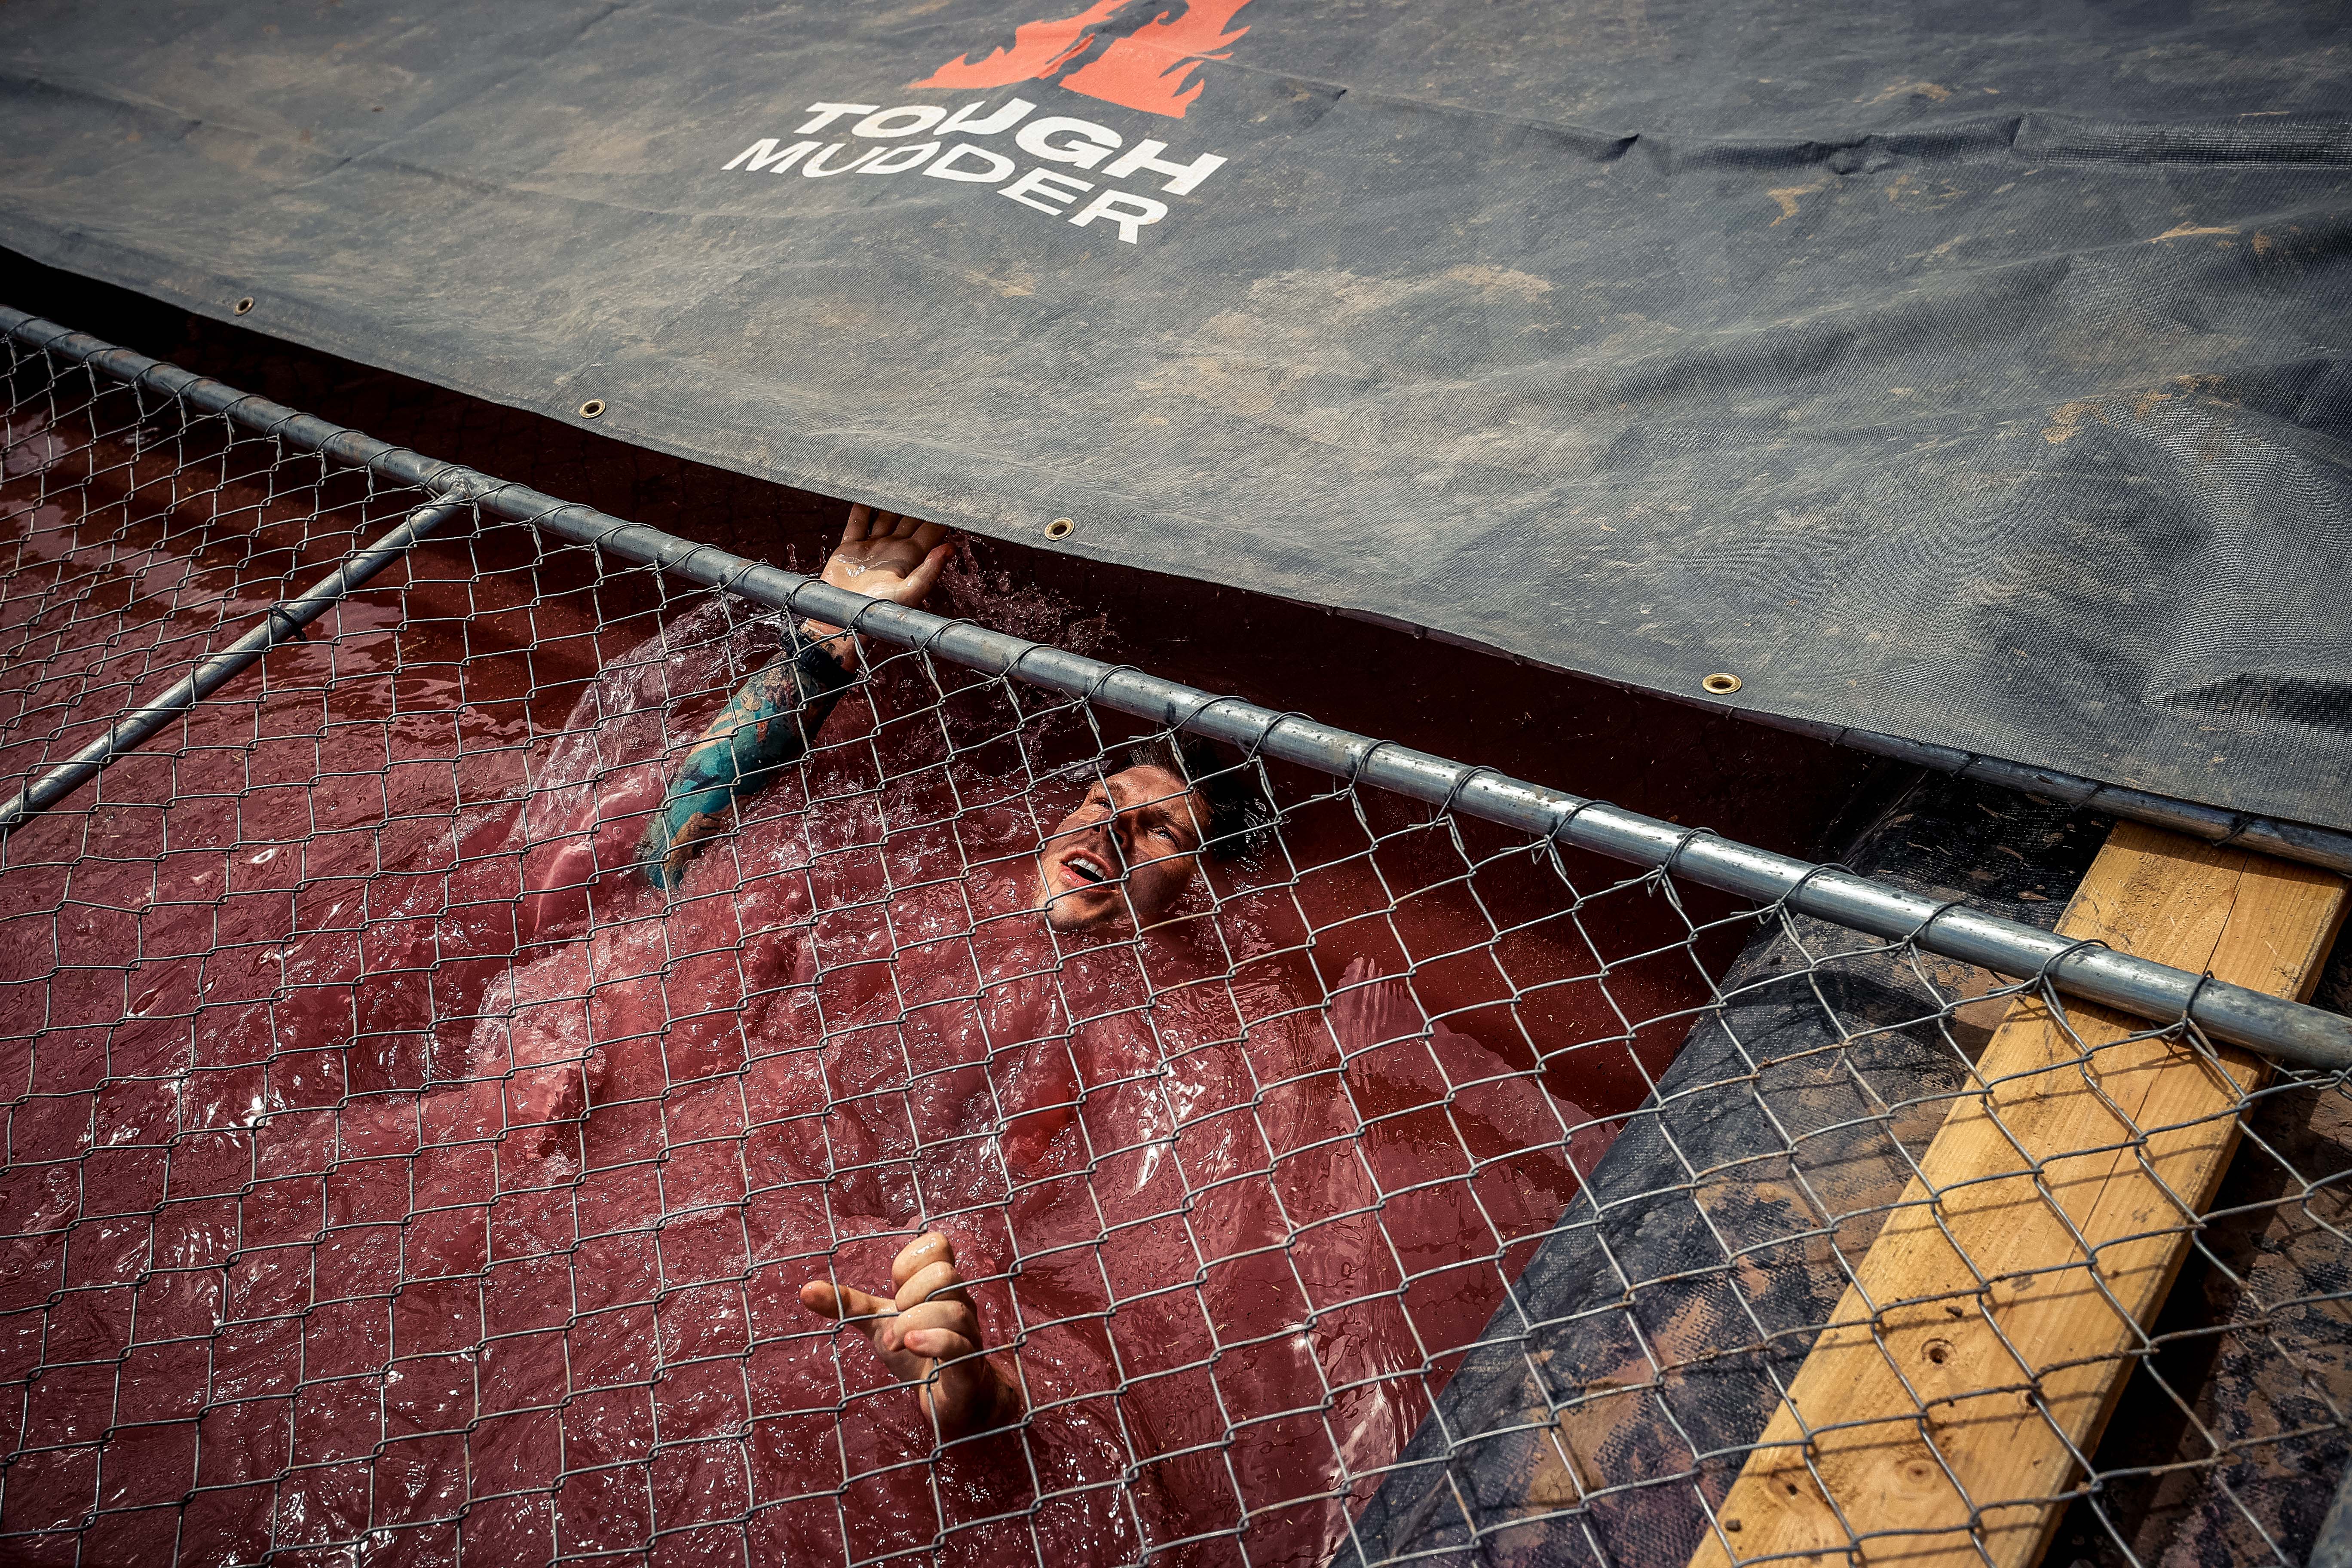 a Tough Mudder racer completing the Cage Crawl obstacle